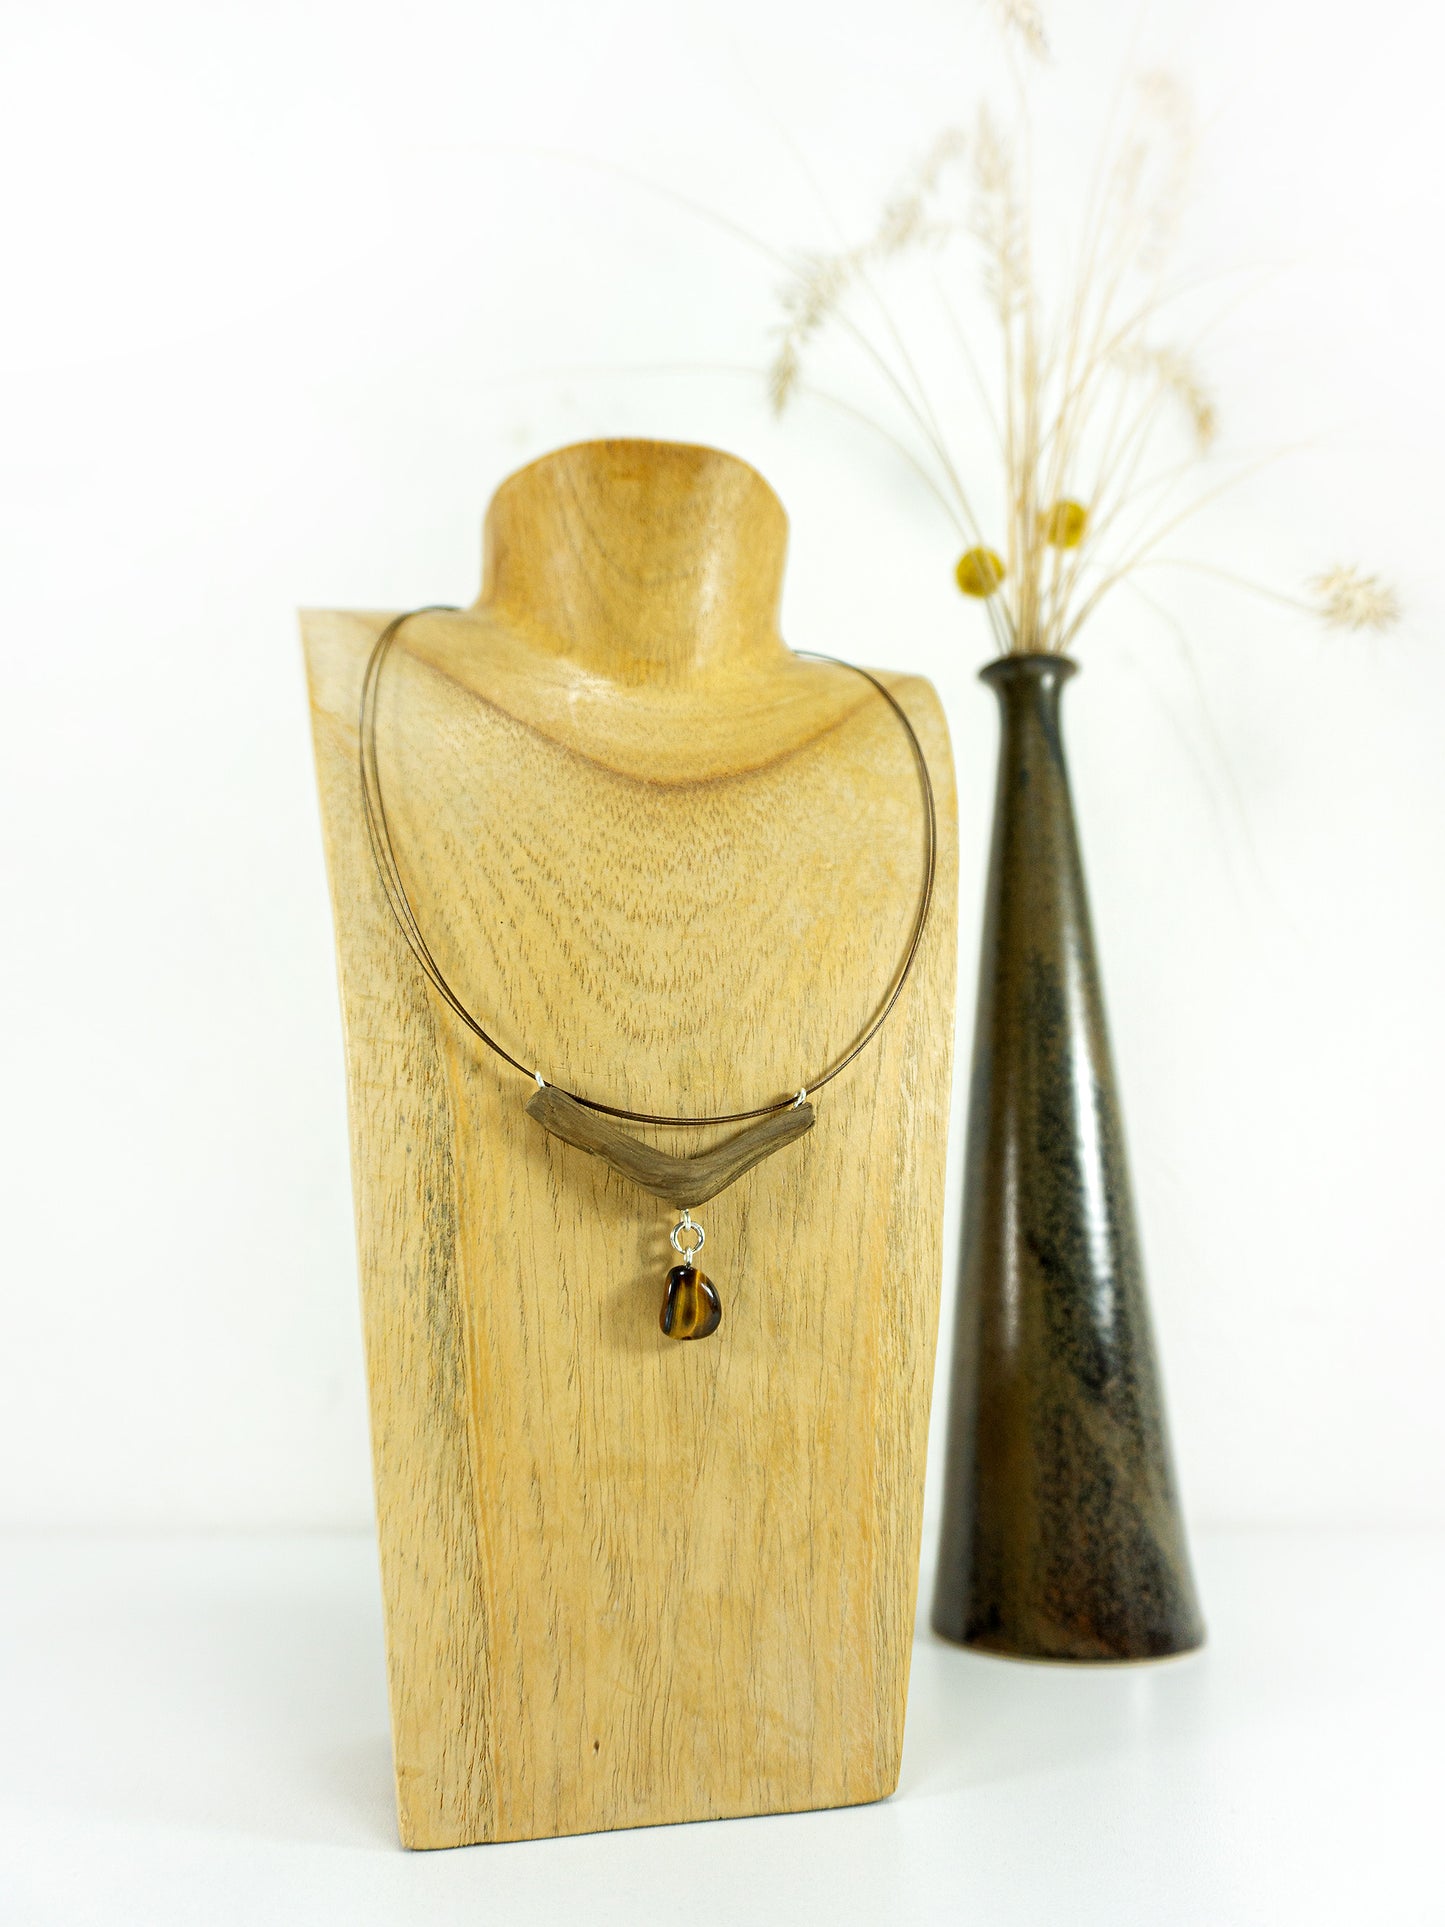 One-of-a-kind DRIFTWOOD NECKLACE 'Fünen' with tiger eye, 925 silver